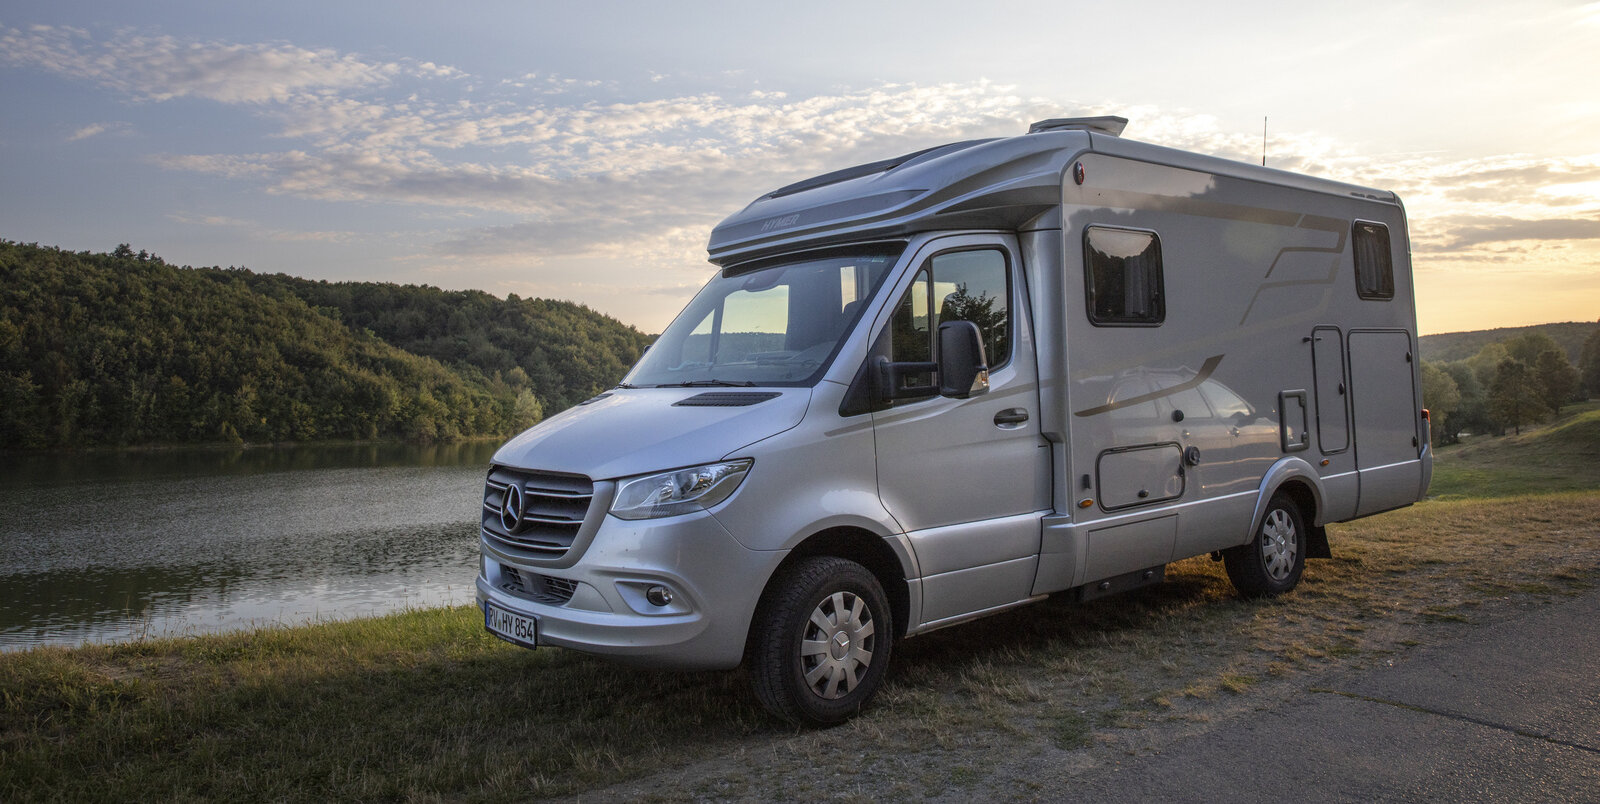 HYMER ML-T 580 in a Mercedes standing on hard shoulder by a body of water with a forest on the other bank